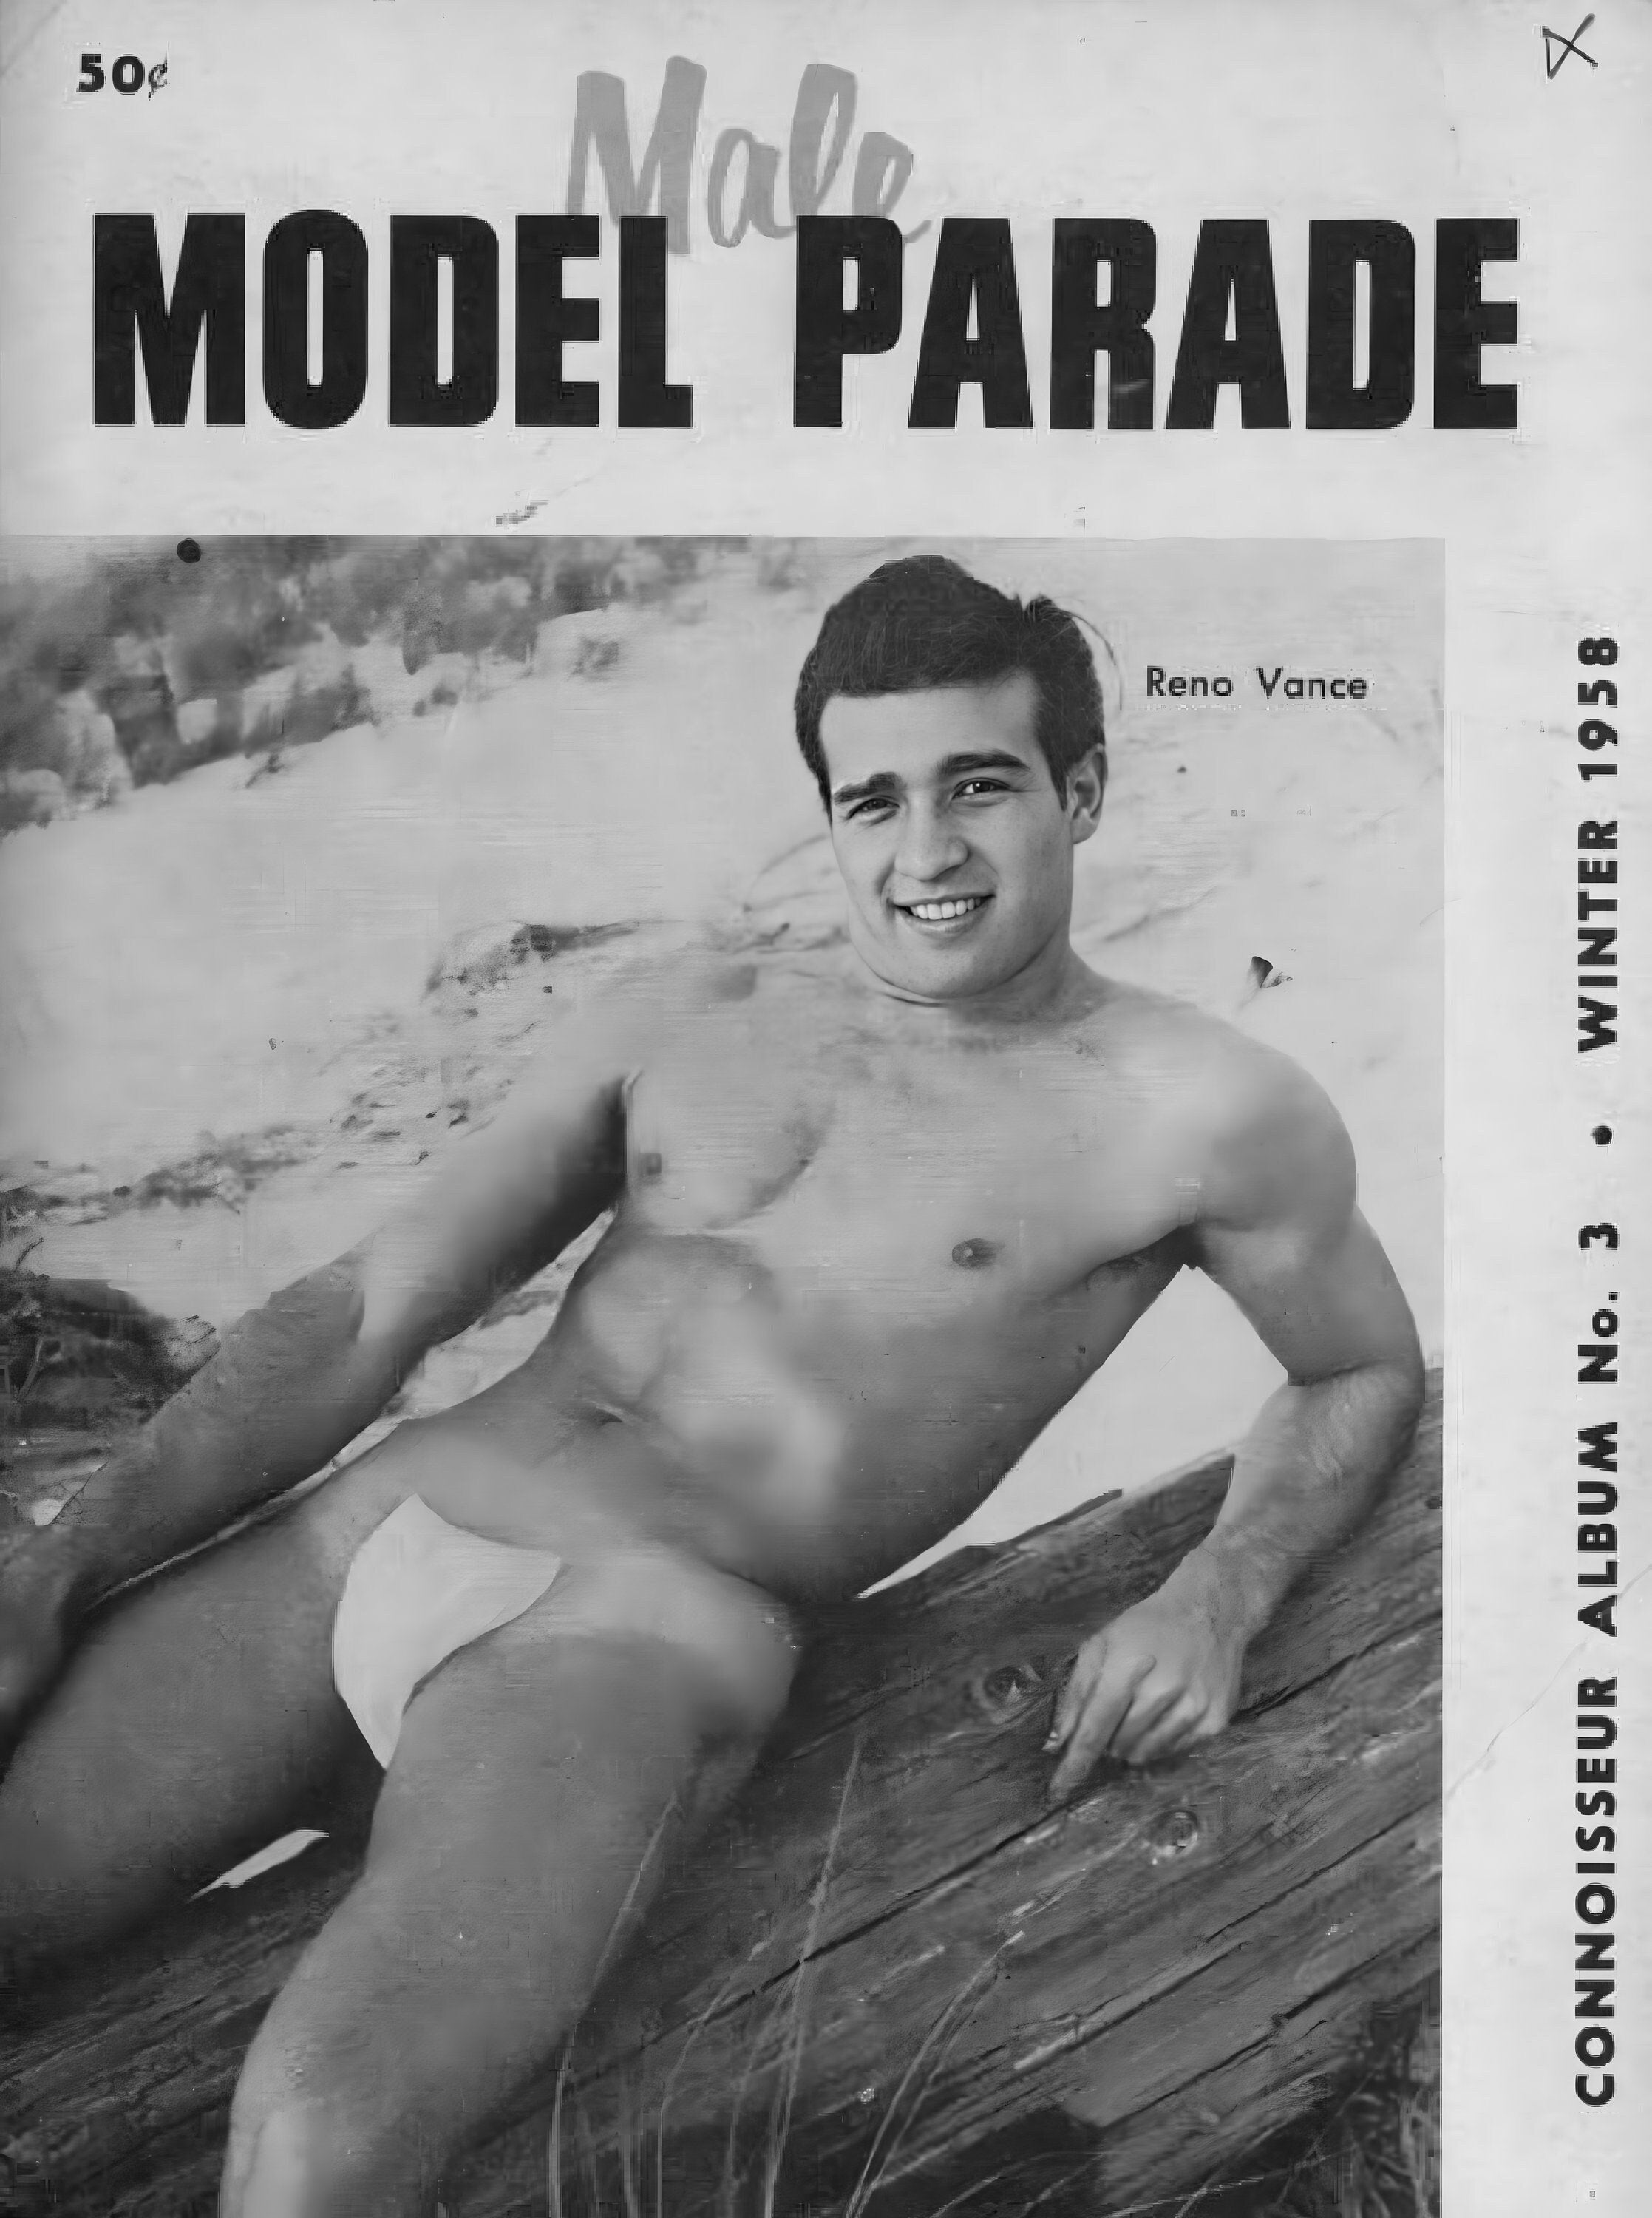 Sultry and Sensual: Vintage Beefcake Nudes for the Adult Connoisseur